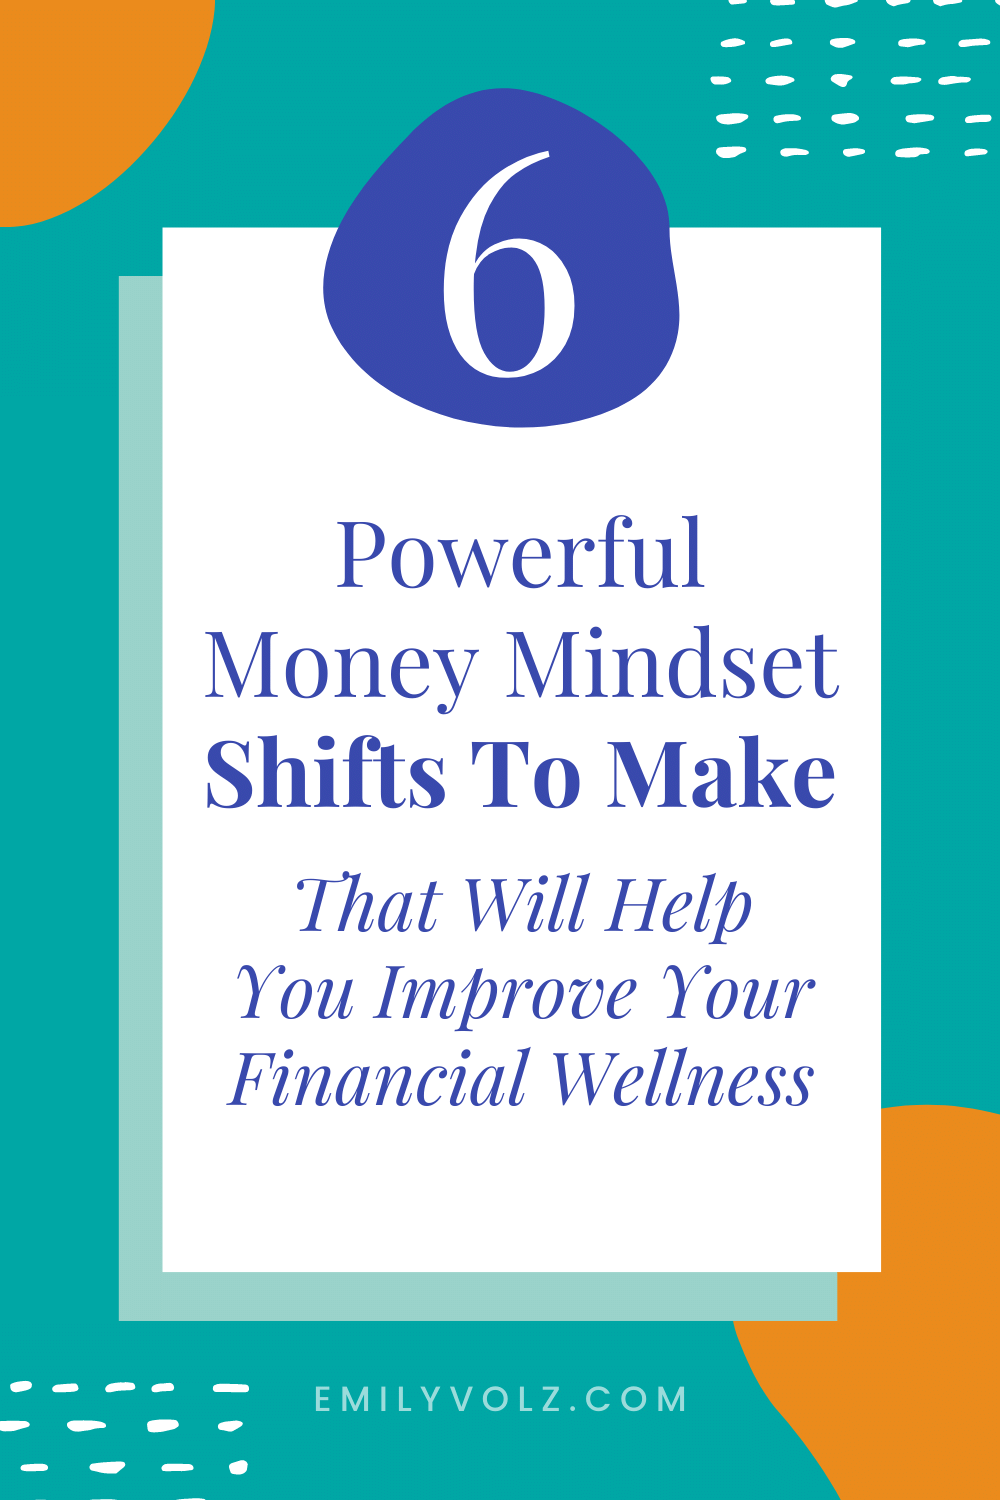 6 Powerful Money Mindset Shifts To Make That Will Help You Improve Your Financial Wellness | Emily Volz Bookkeeper & CFO